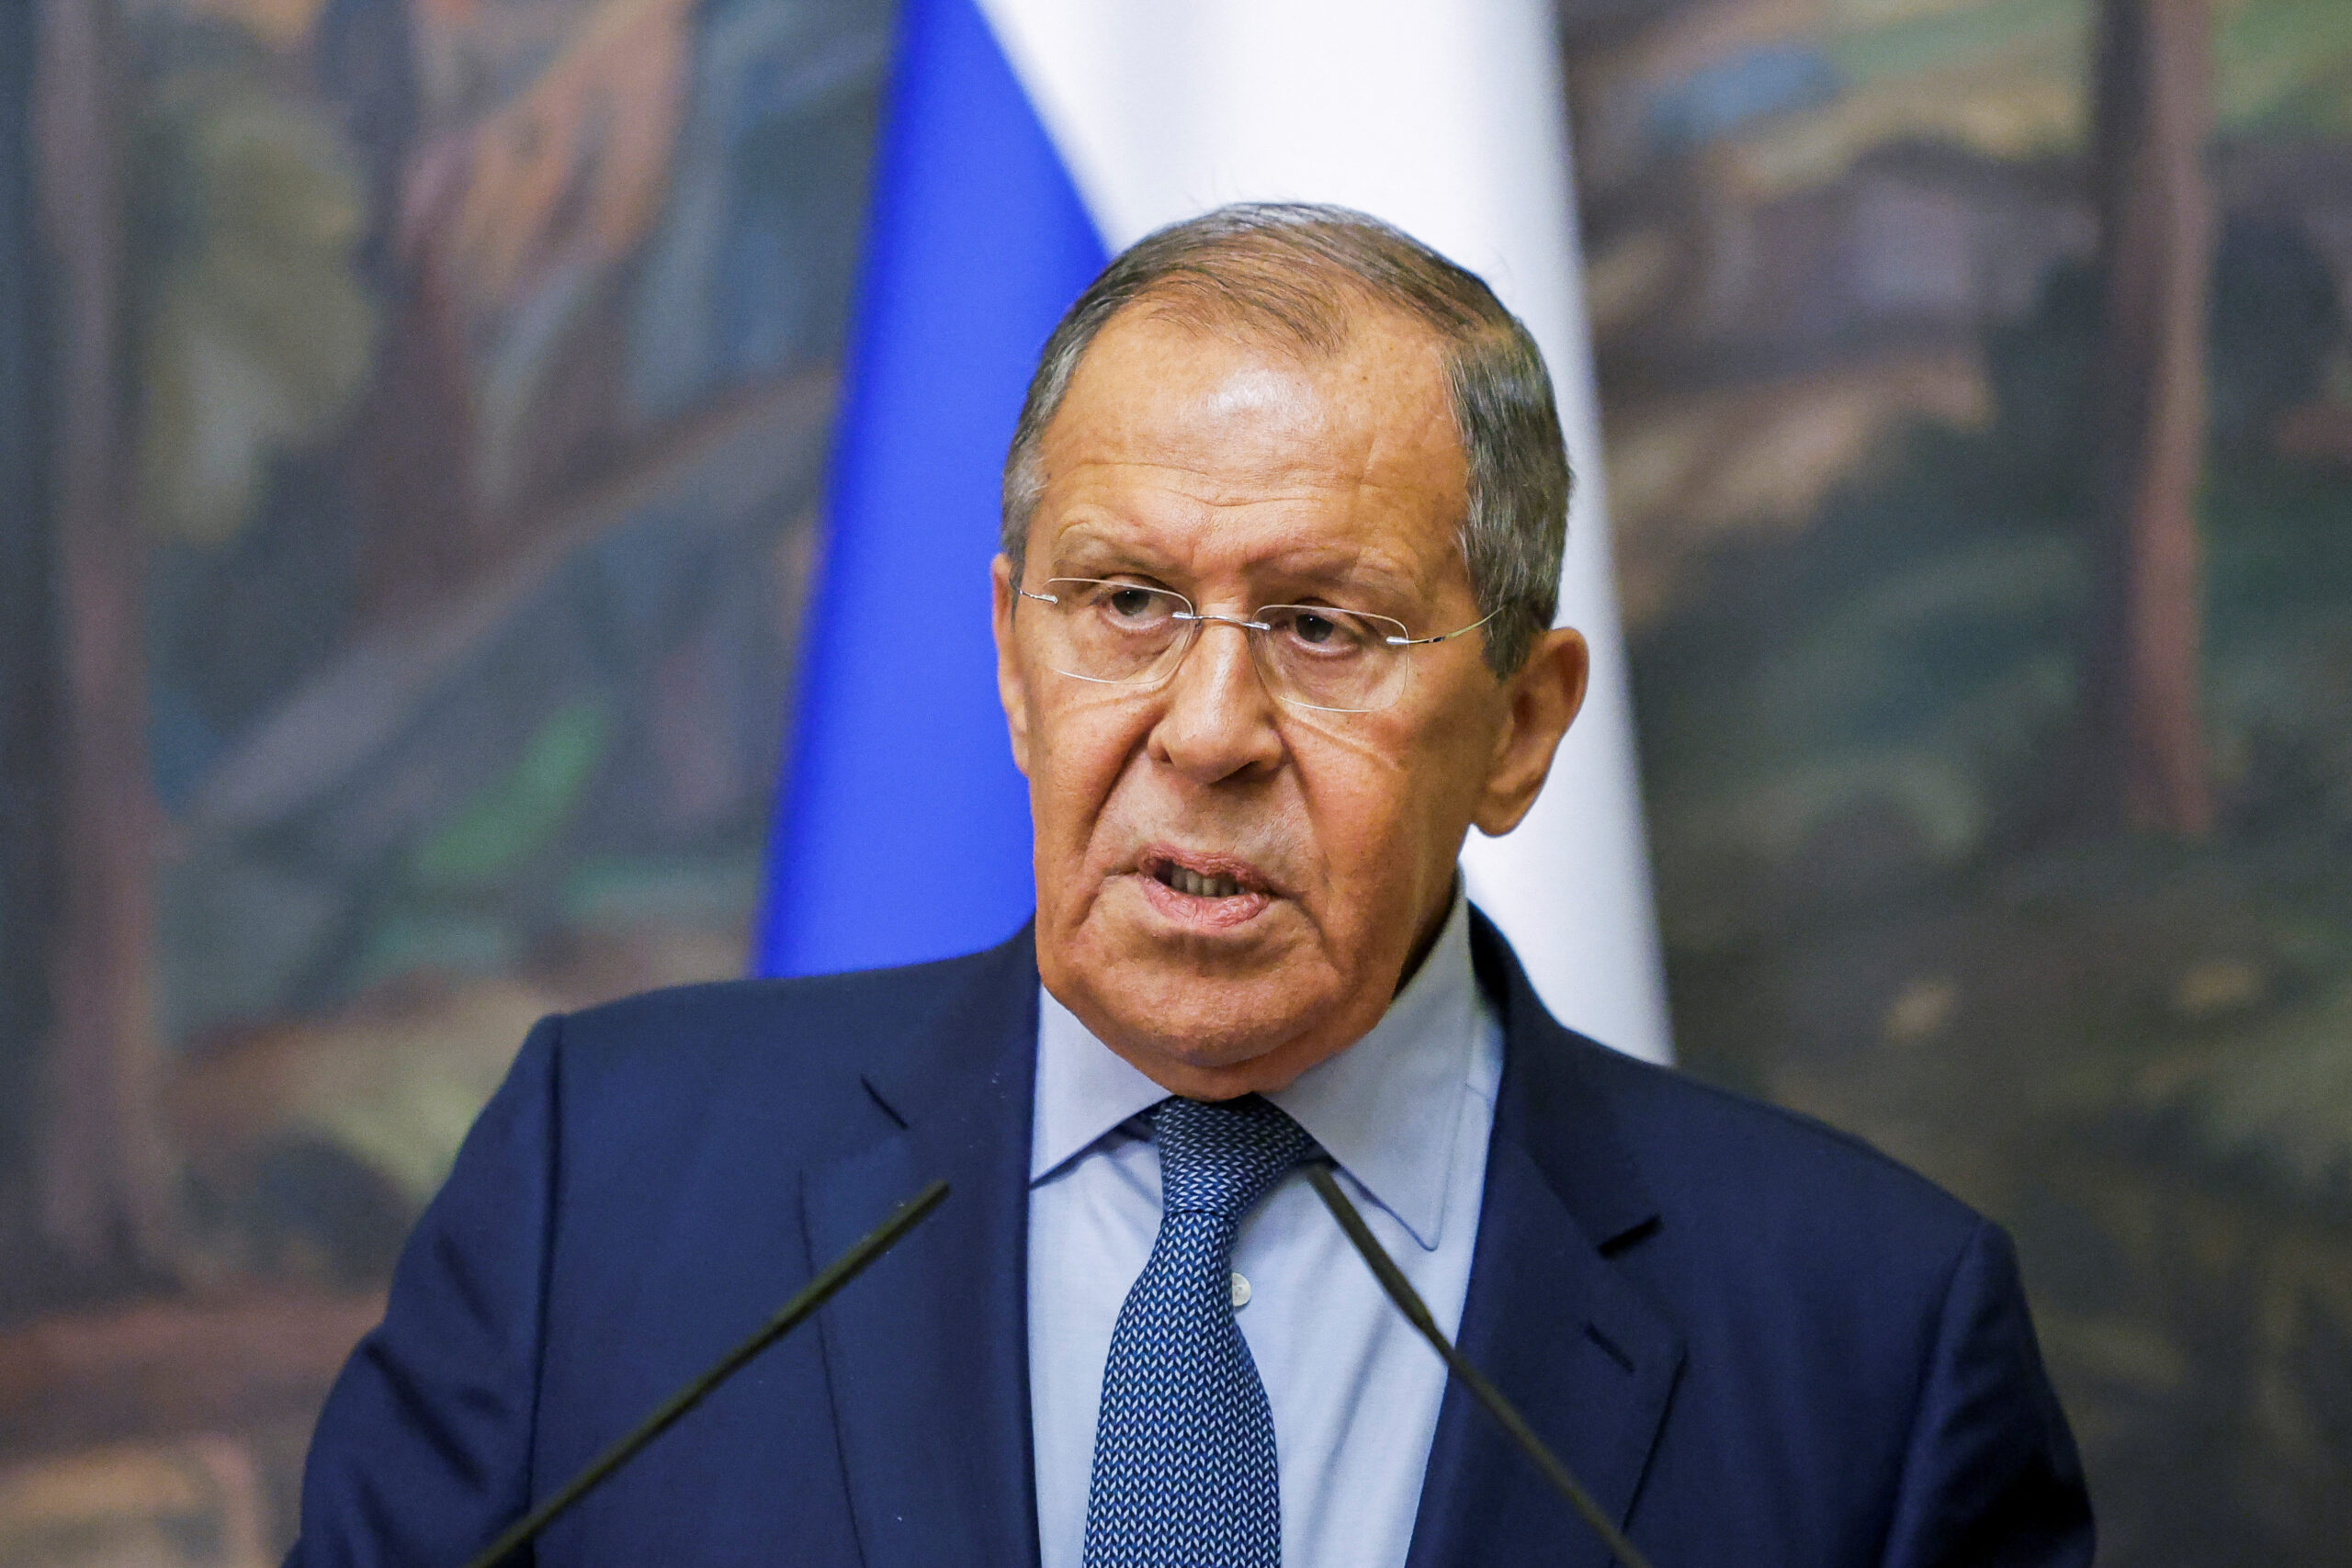 Russia says no US visa yet for Lavrov visit to United Nations